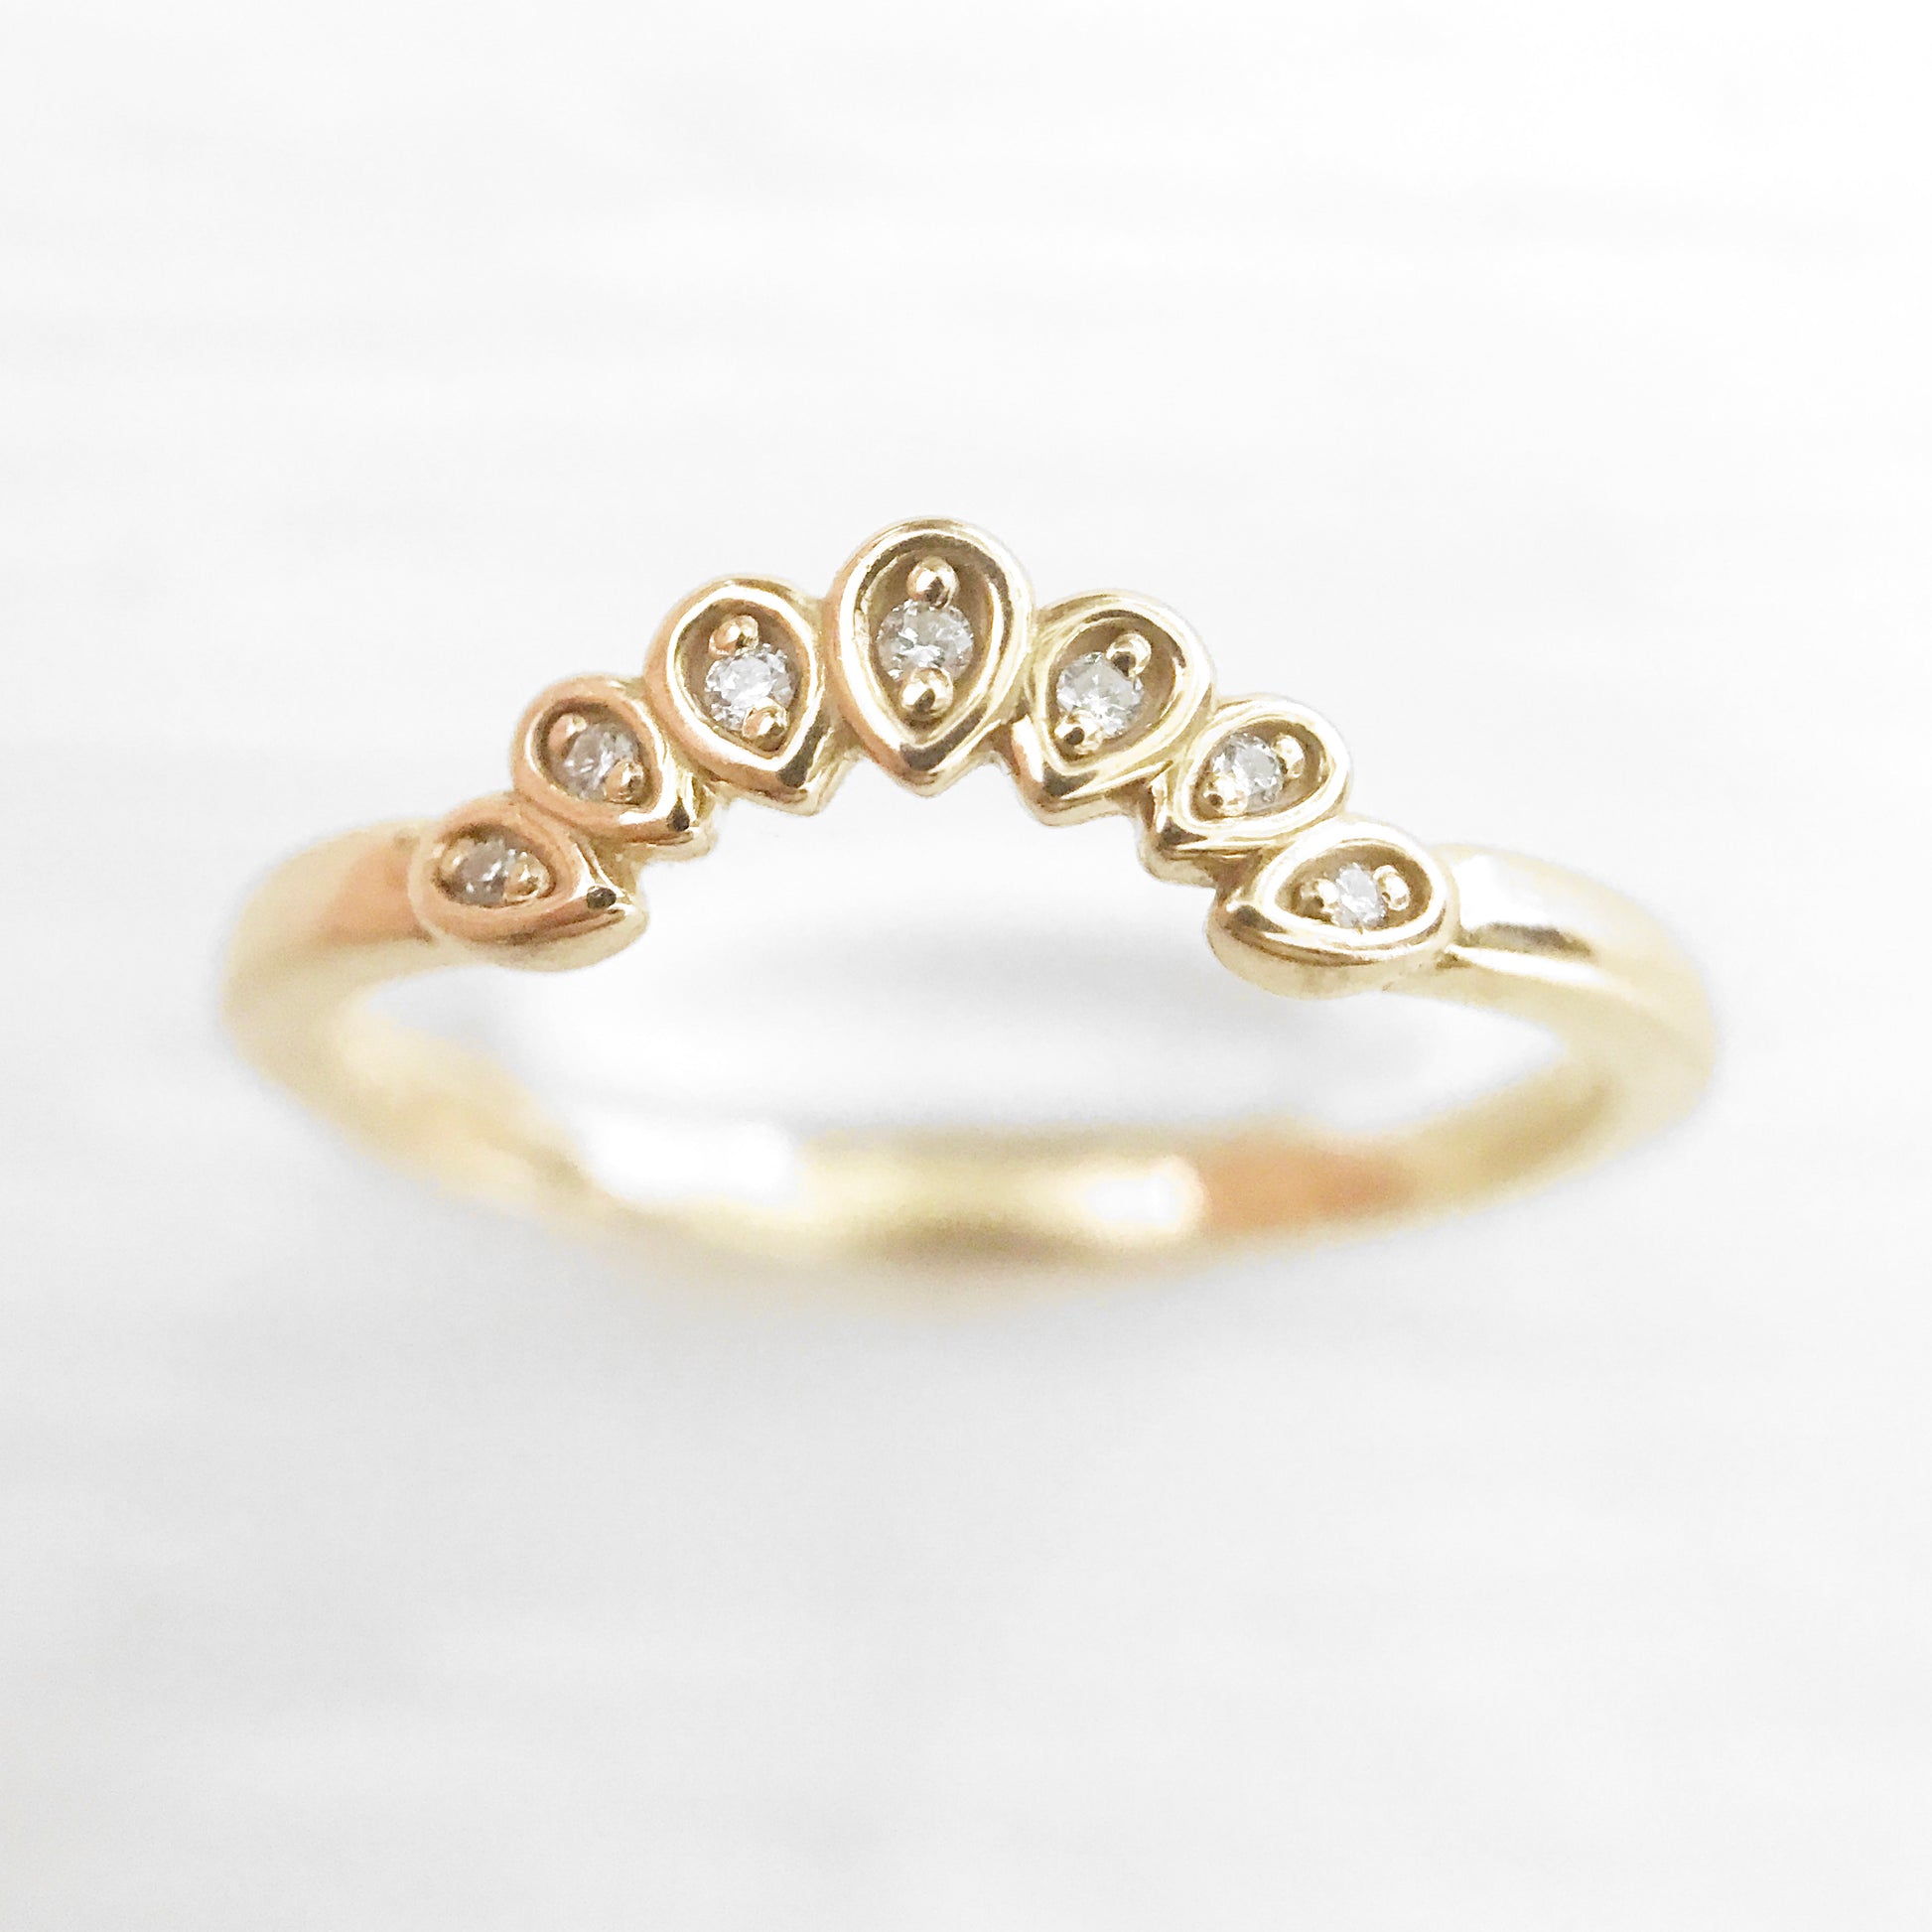 Flora - Curved antique style diamond band - Midwinter Co. Alternative Bridal Rings and Modern Fine Jewelry